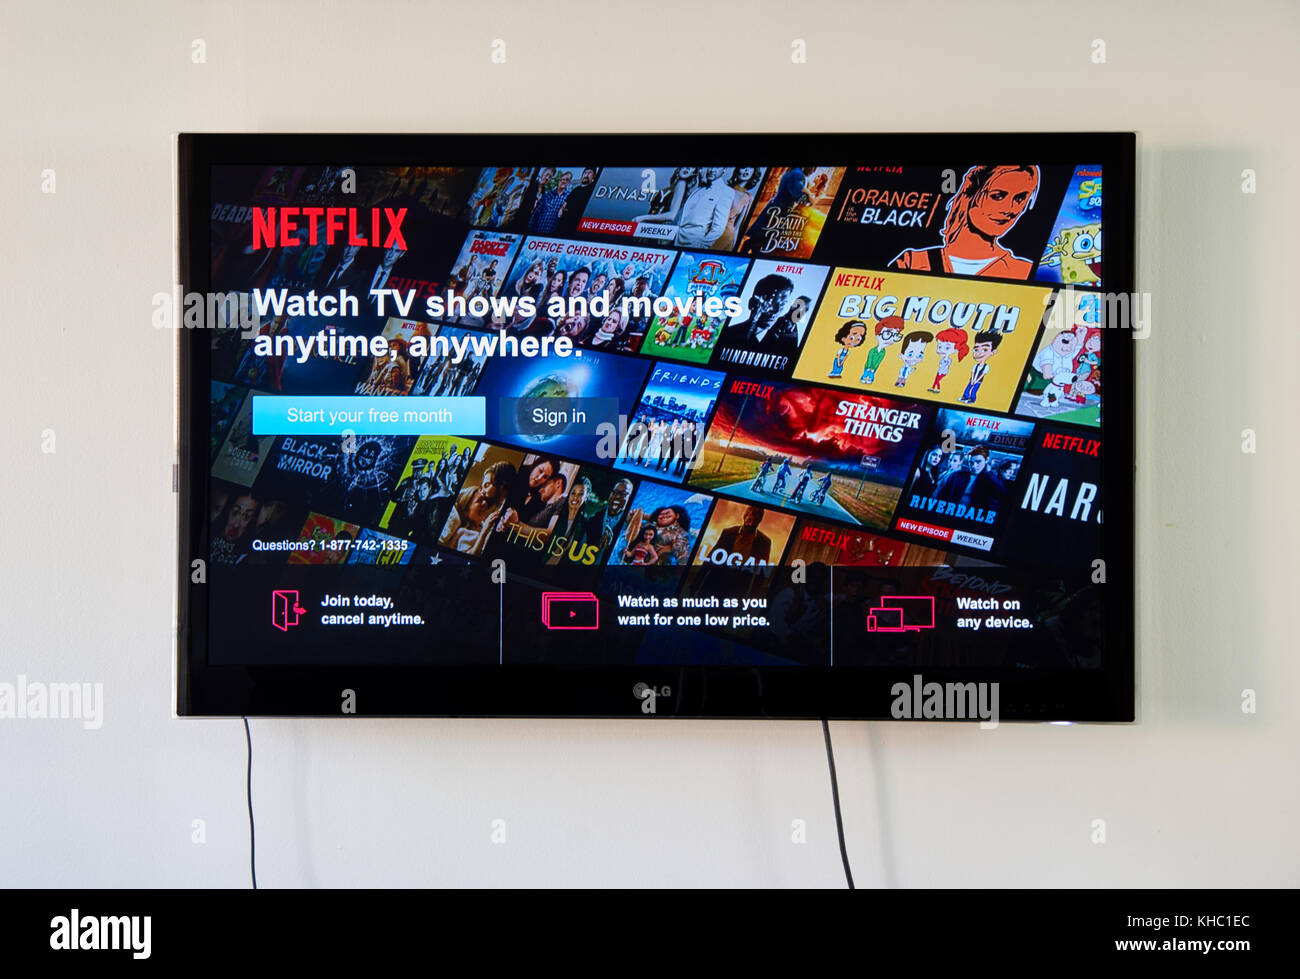 MONTREAL, CANADA - NOVEMBER 15, 2017: Netflix Sign In and free trial page on LG TV. Netflix is an American entertainment company founded by Reed Hasti Stock Photo